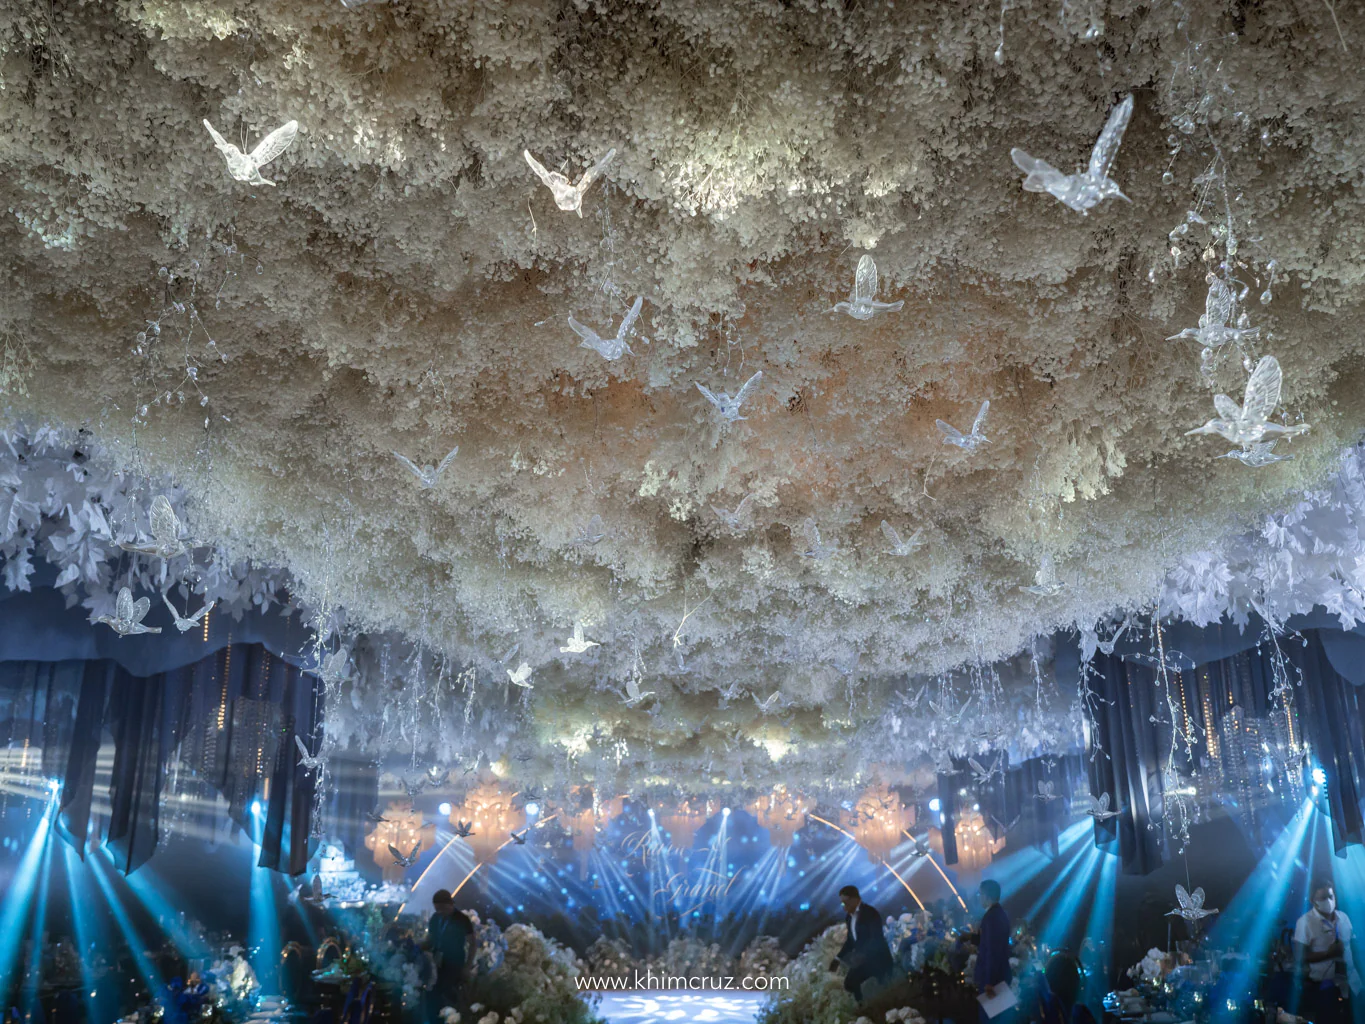 48 feet Gypsophilas hanged with crystals and birds as ceiling installation at a dreamy blue ethereal wedding